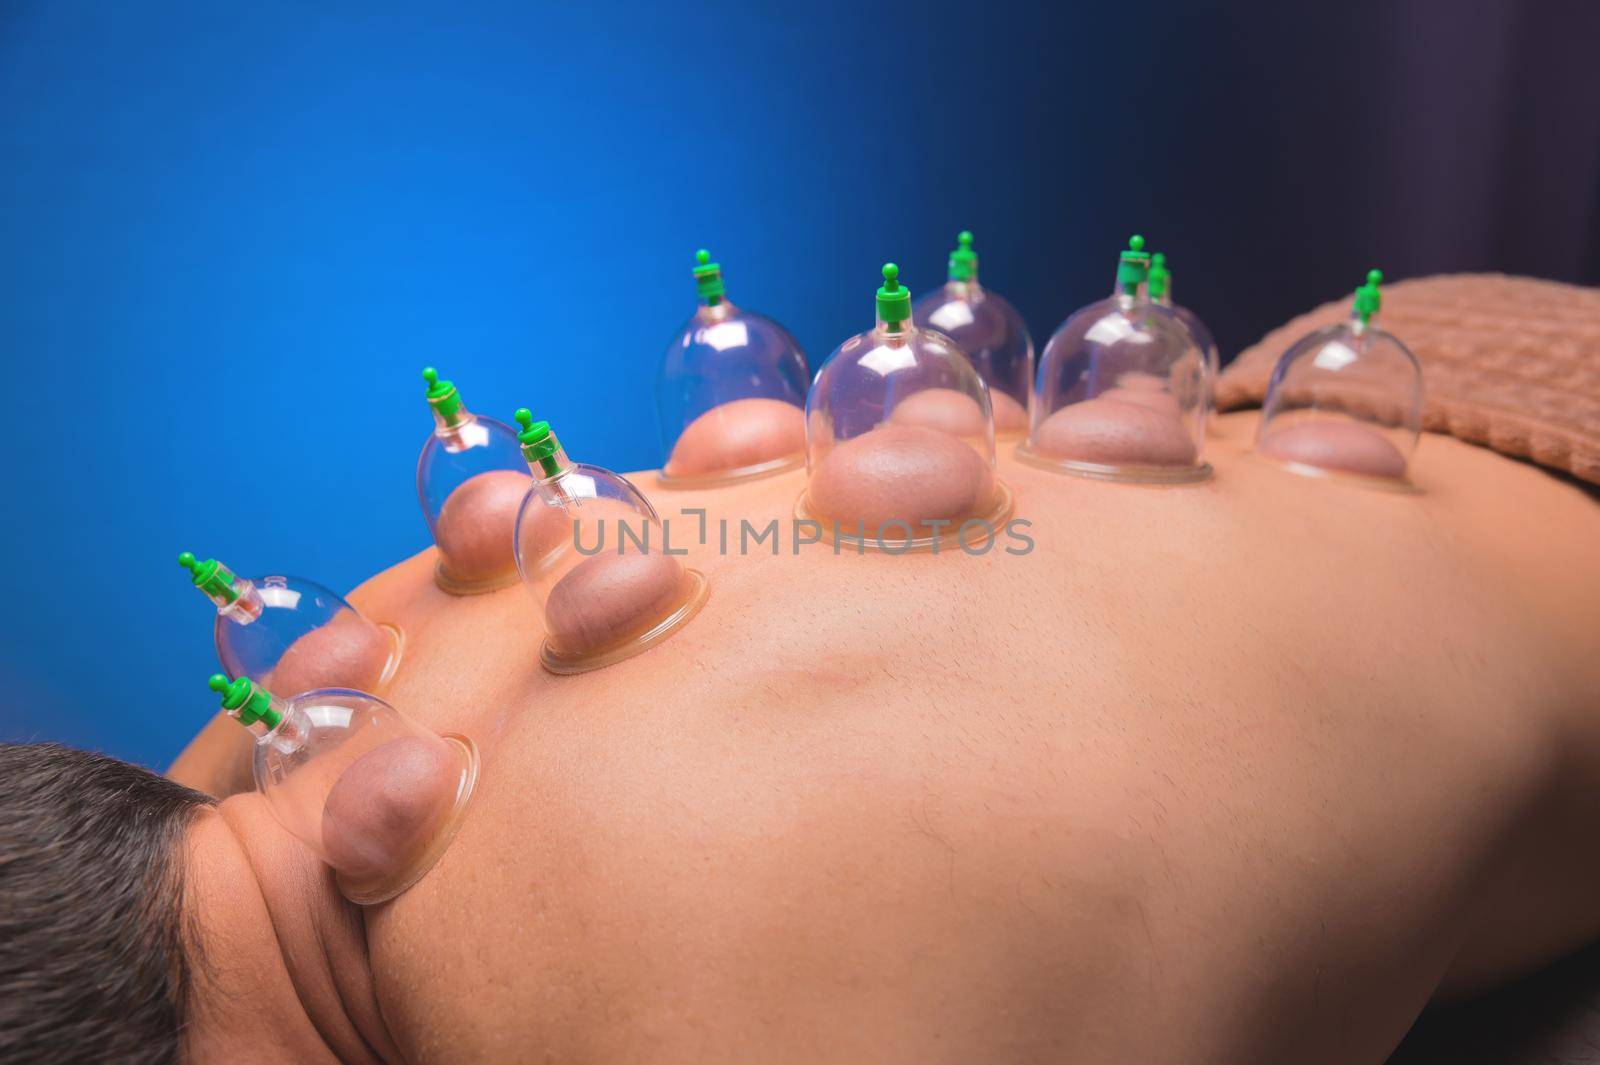 Cup massage in general. Vacuum jars for back massage for a man. Massage with vacuum cups. Cupping treatments for back pain relief. Caucasian man lies face down with mounted vacuum cups on his back by yanik88